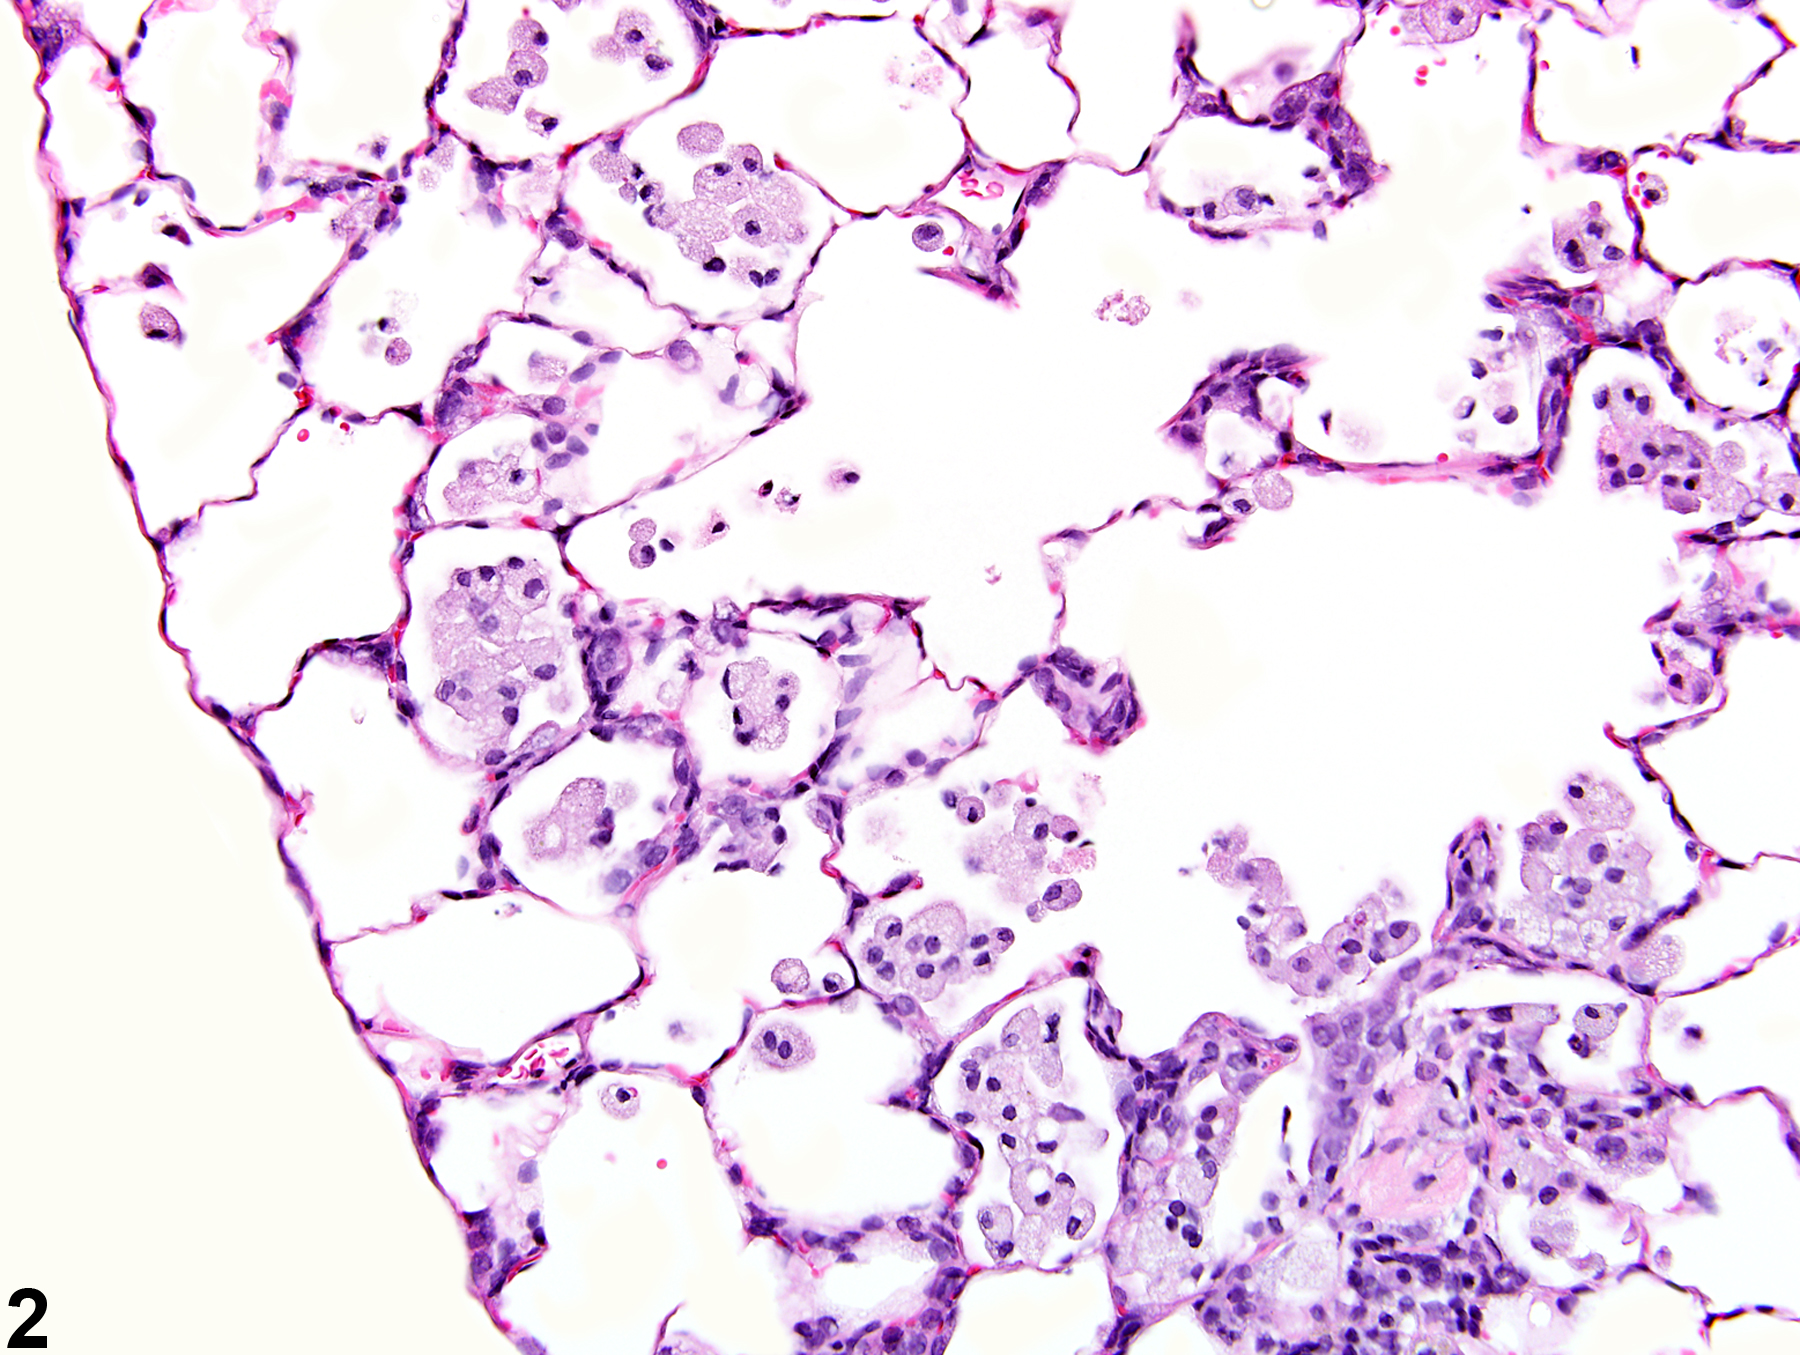 Image of infiltration cellular, histiocyte in the lung from a female Harlan Sprague-Dawley rat in a chronic study